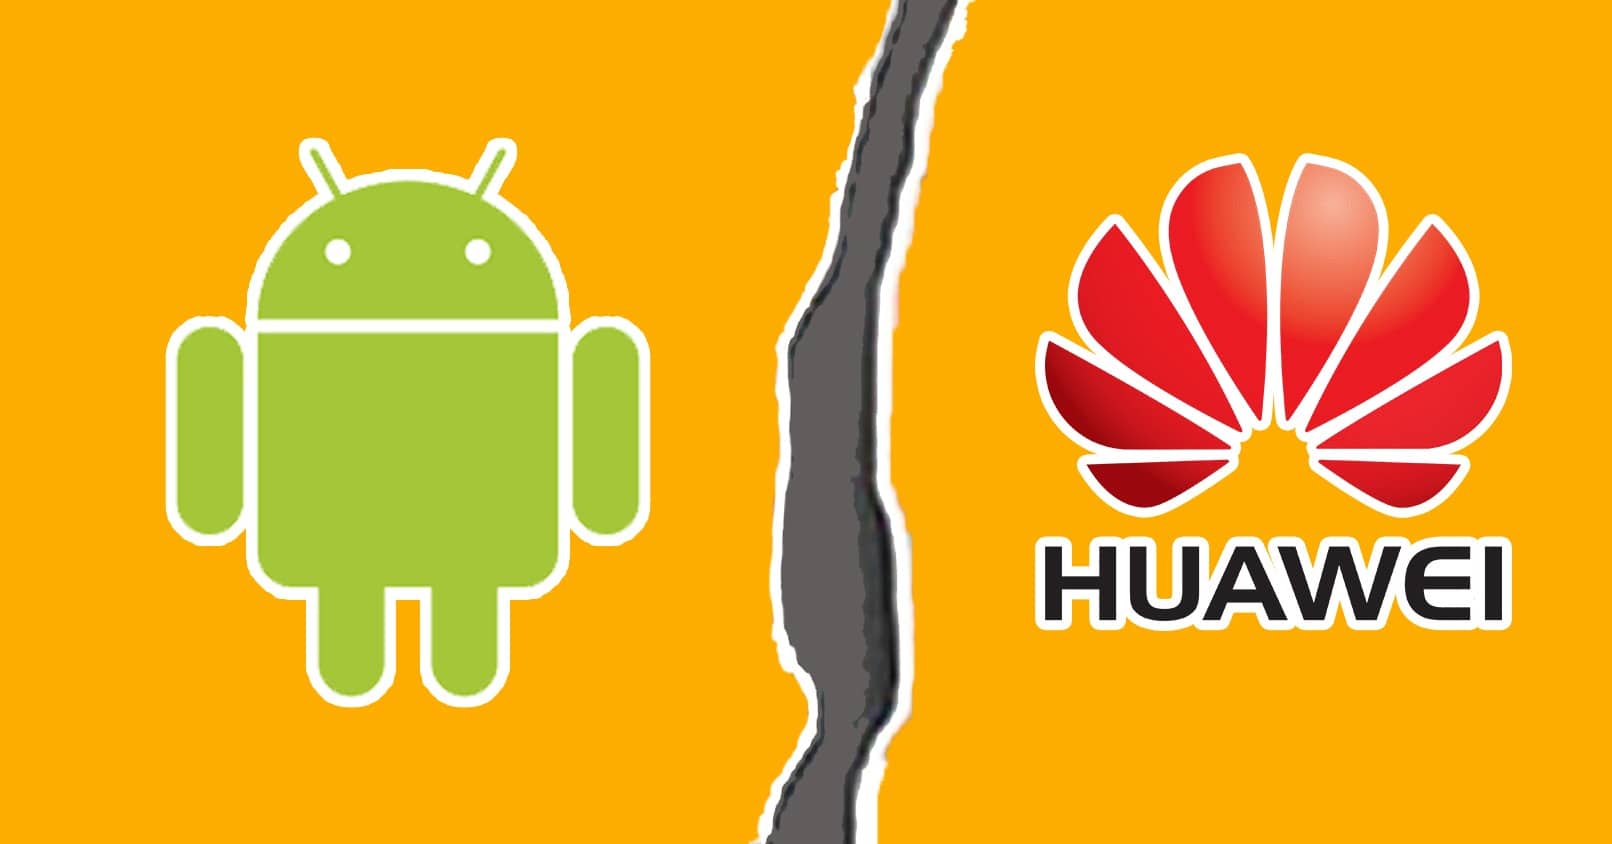 android vs huawei